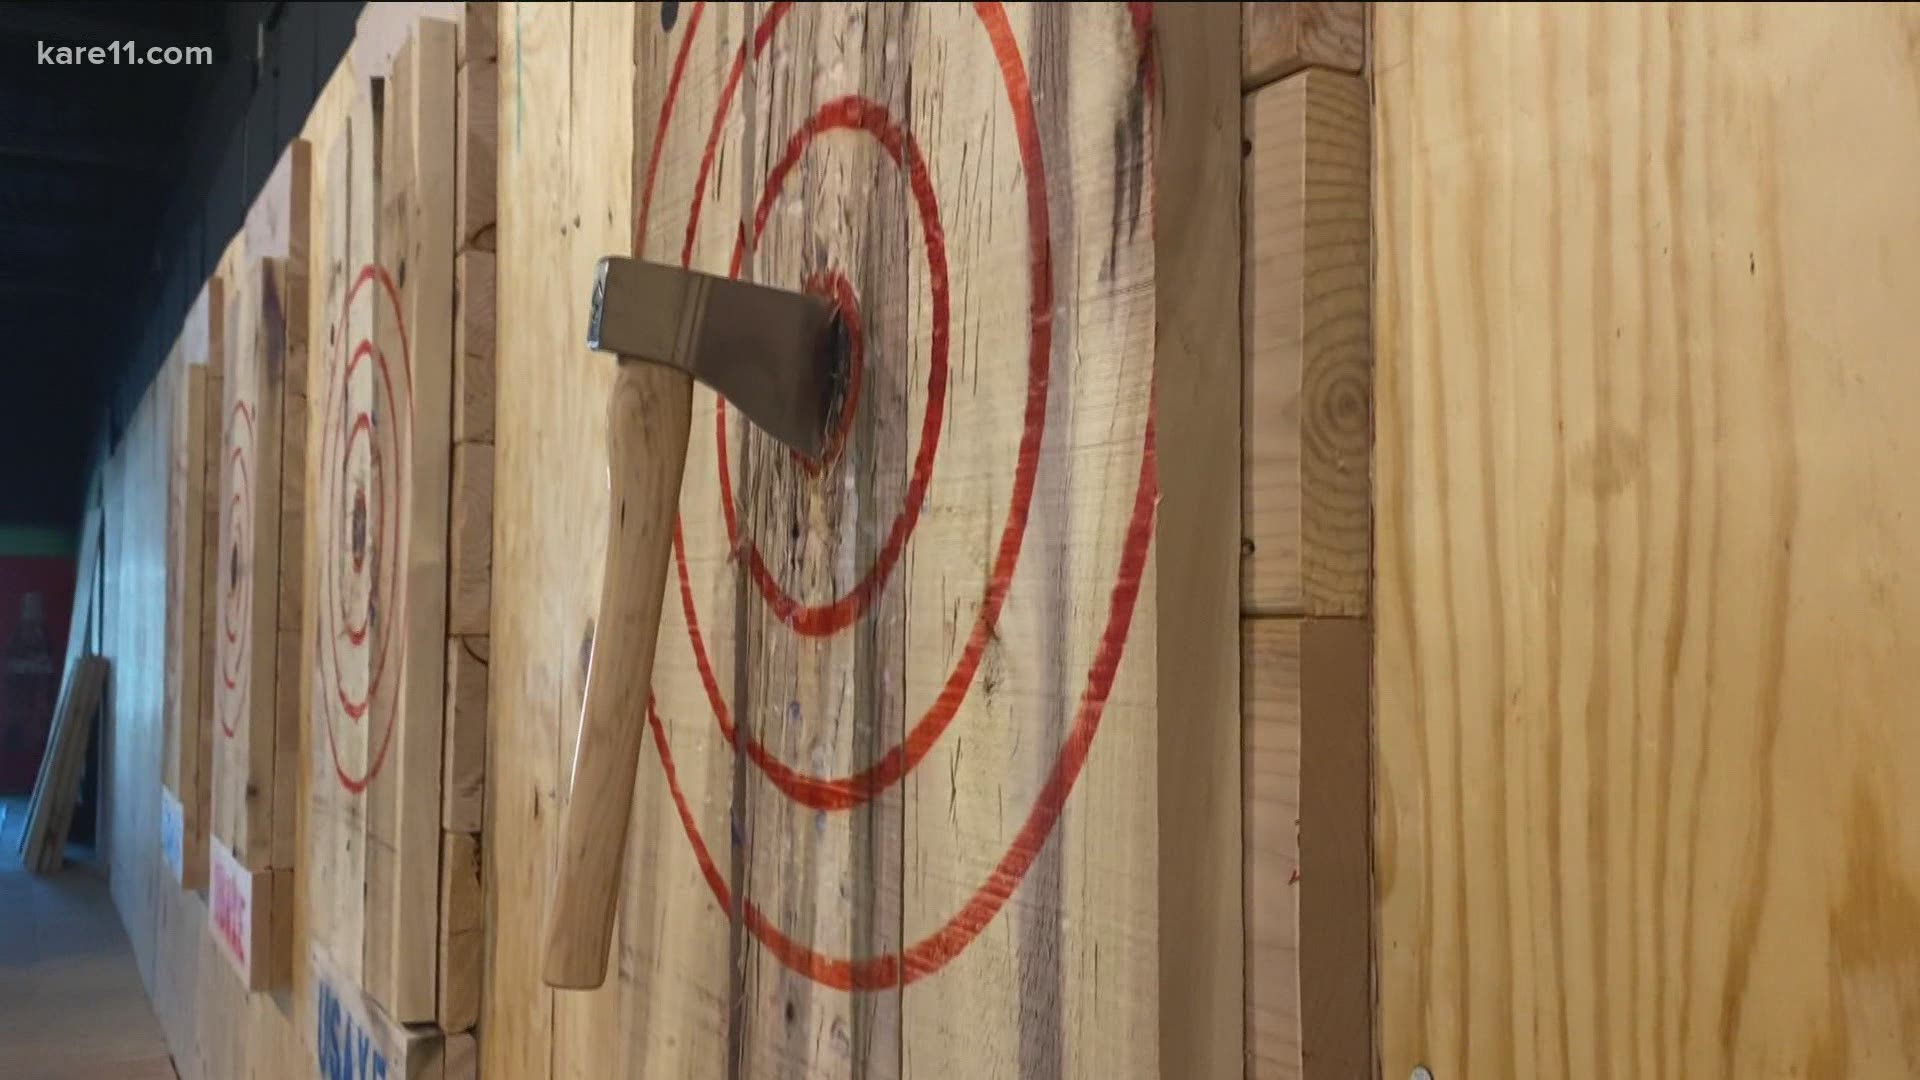 The owners of United States Axe Throwing are taking their business on the road while the brick and mortars are under COVID restrictions.